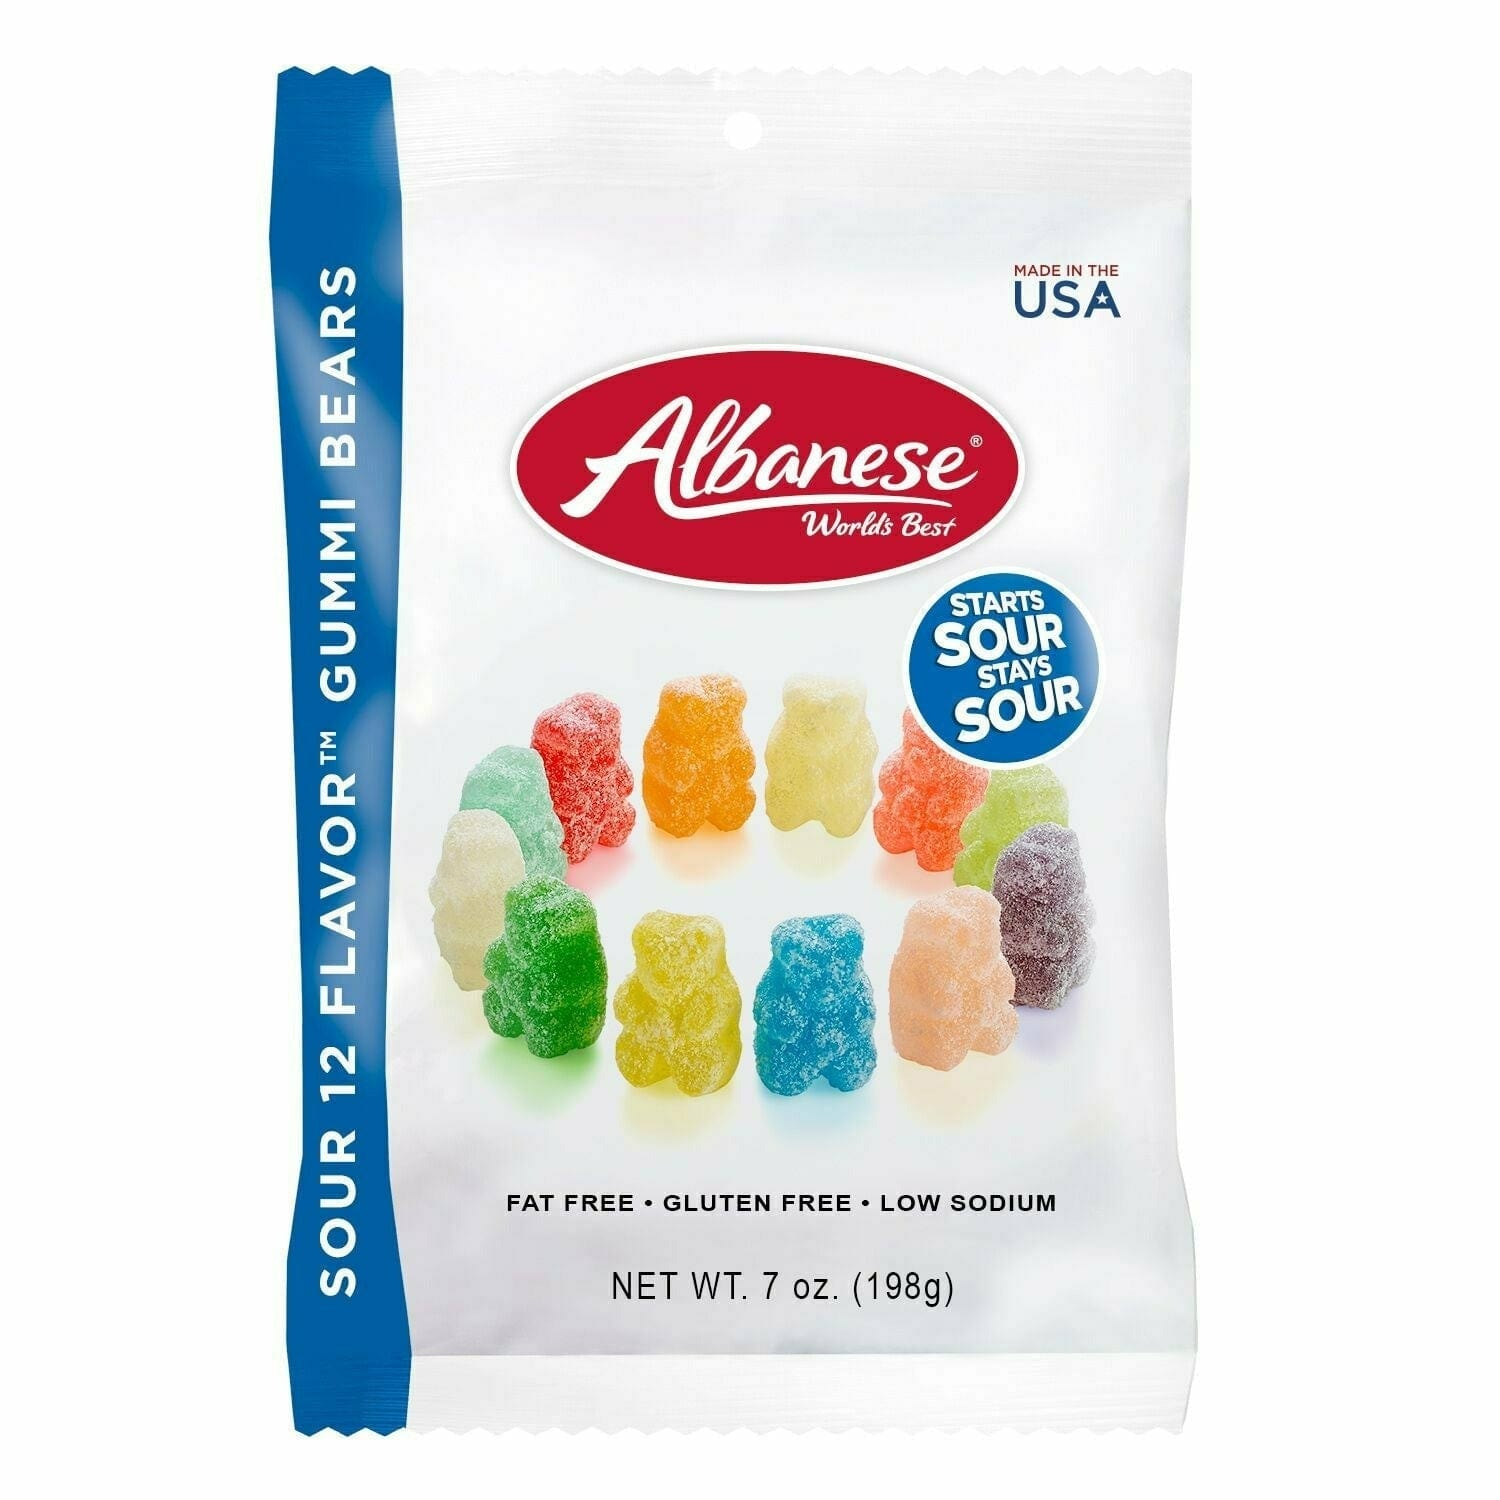 Redstone Foods Inc CANDY Albanese Gummi Bears - Sour